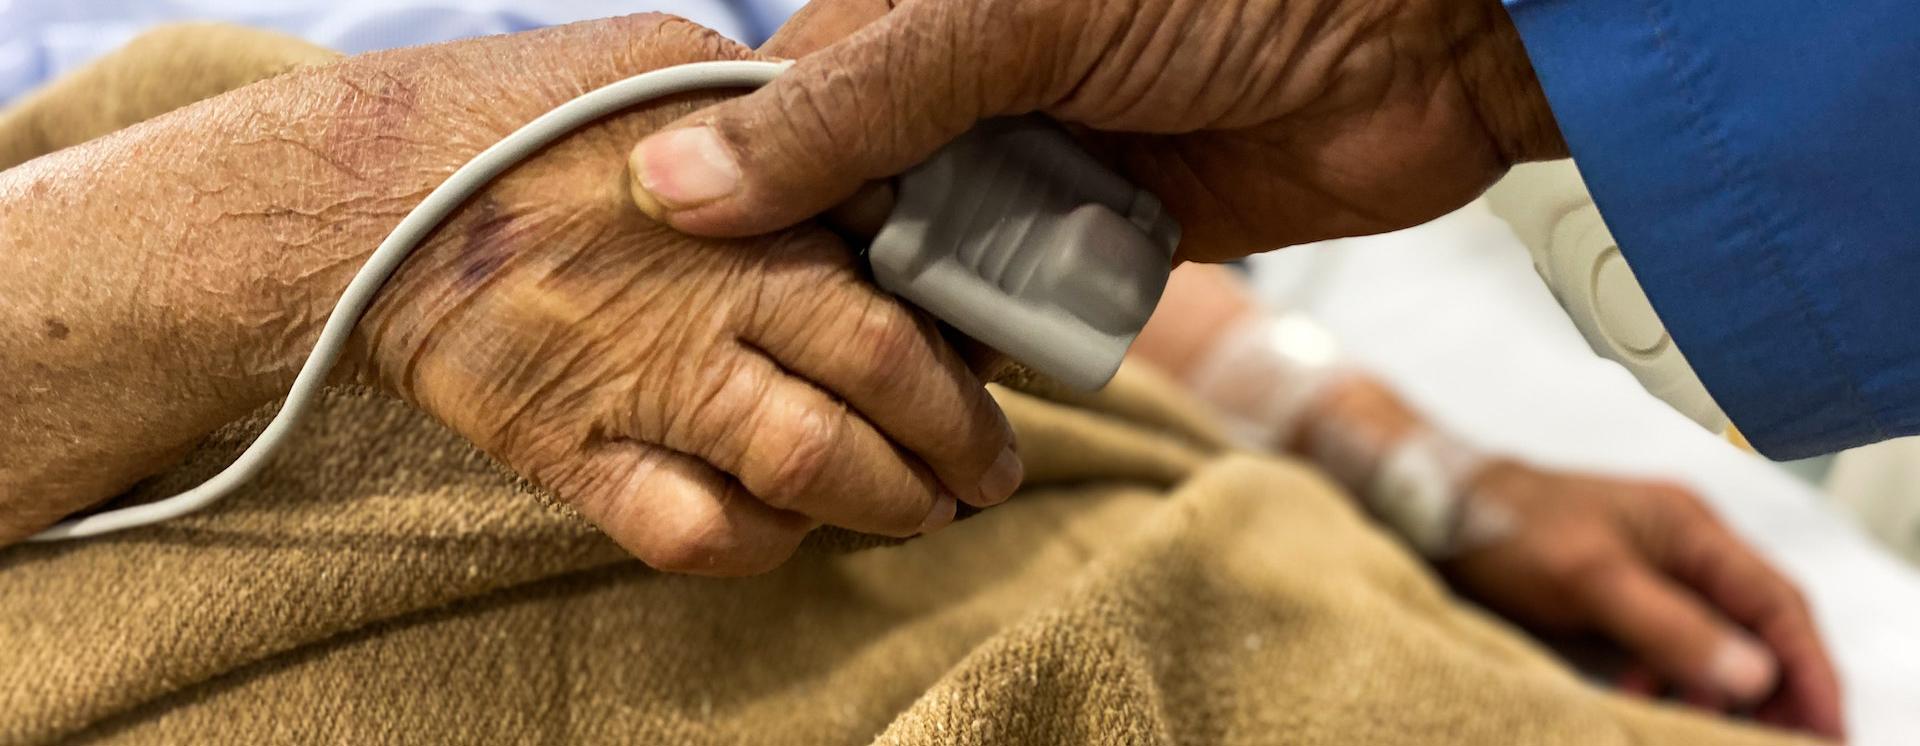 Doctor taking oxygen and pulse readings from an elderly patient